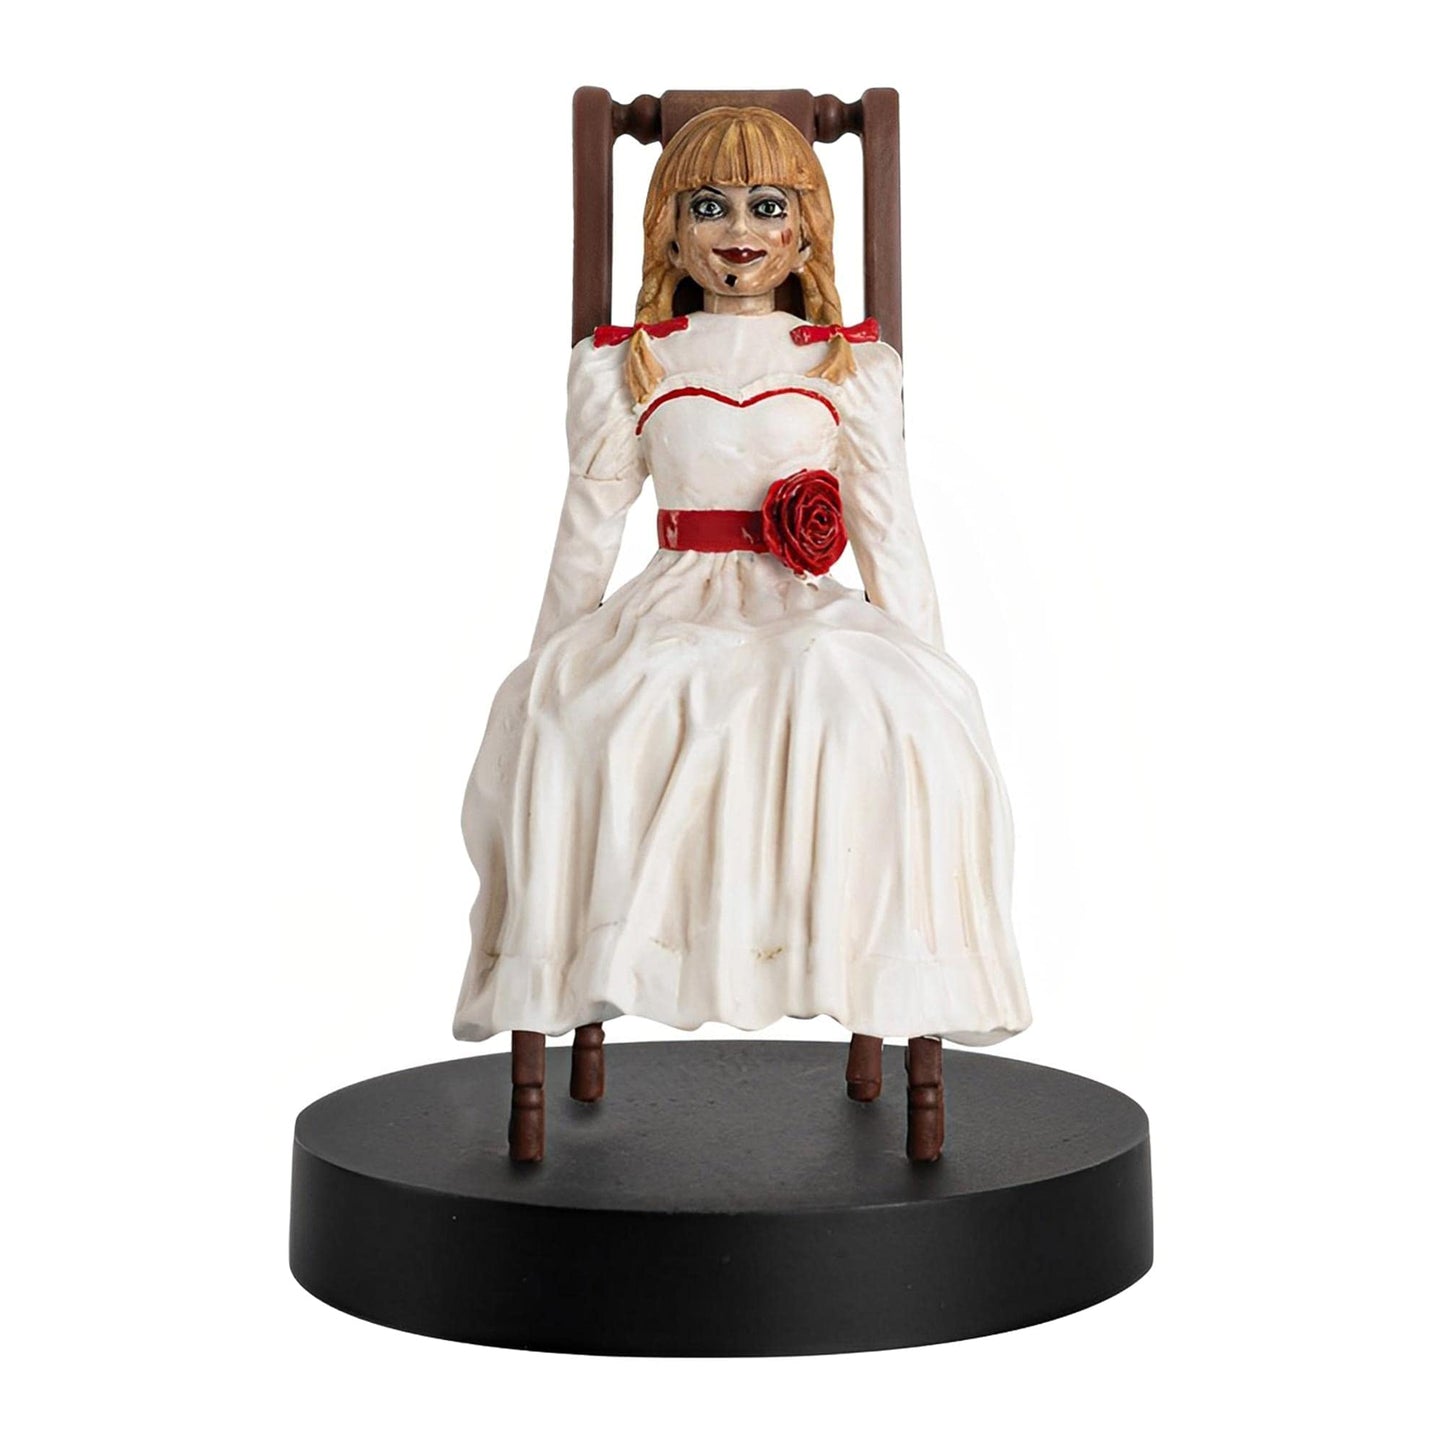 Annabelle Comes Home Figurine